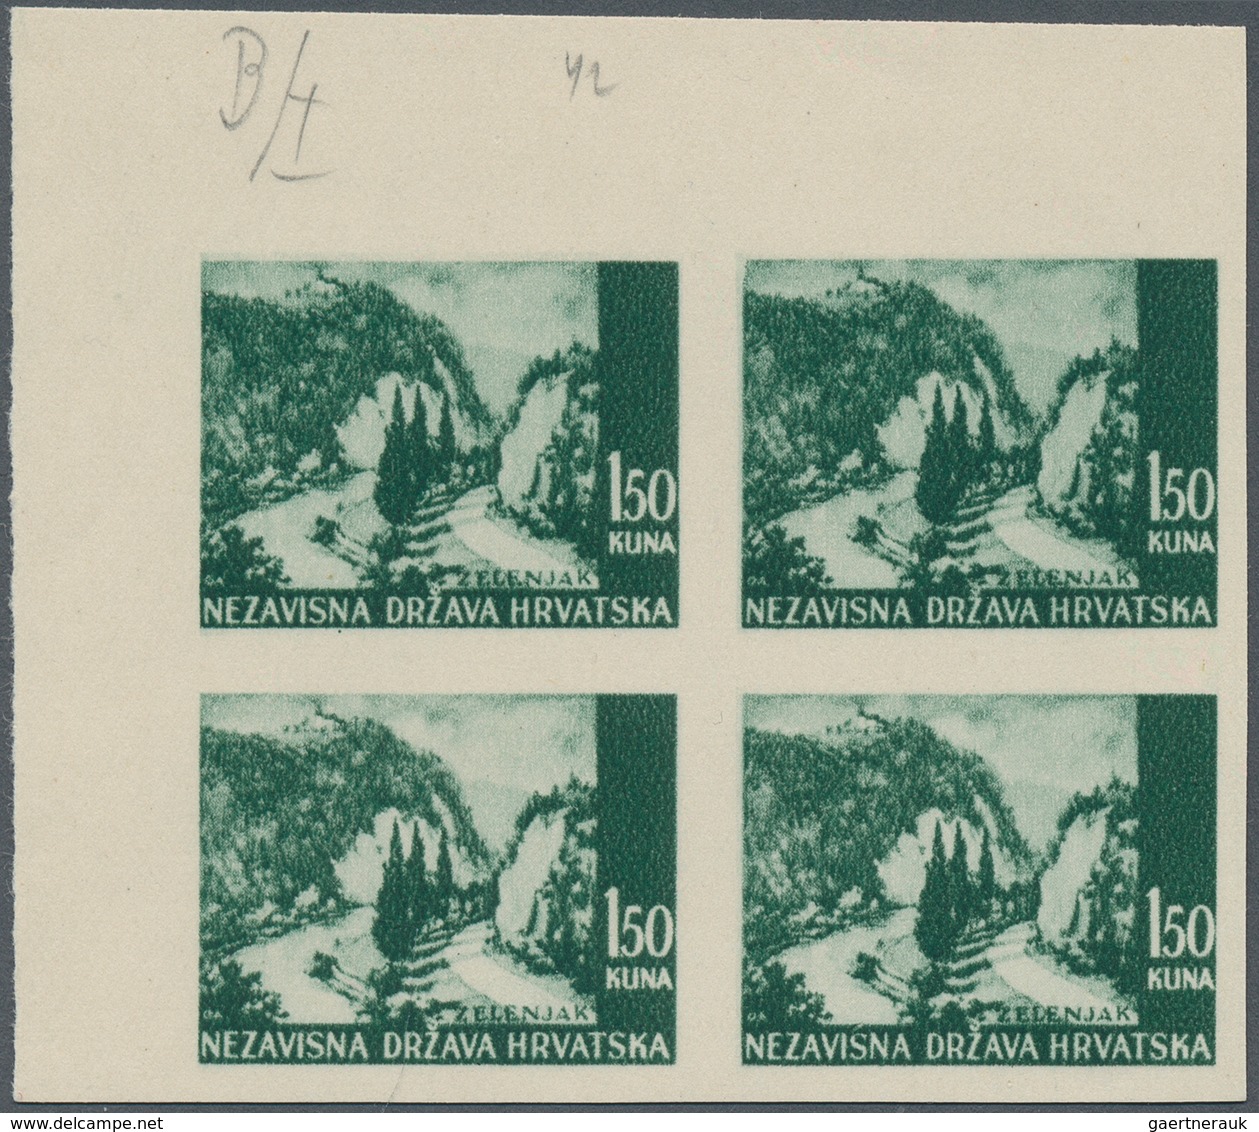 Kroatien: from 1918 interesting lot, almost only better single pieces, incl. trial prints, imperfora